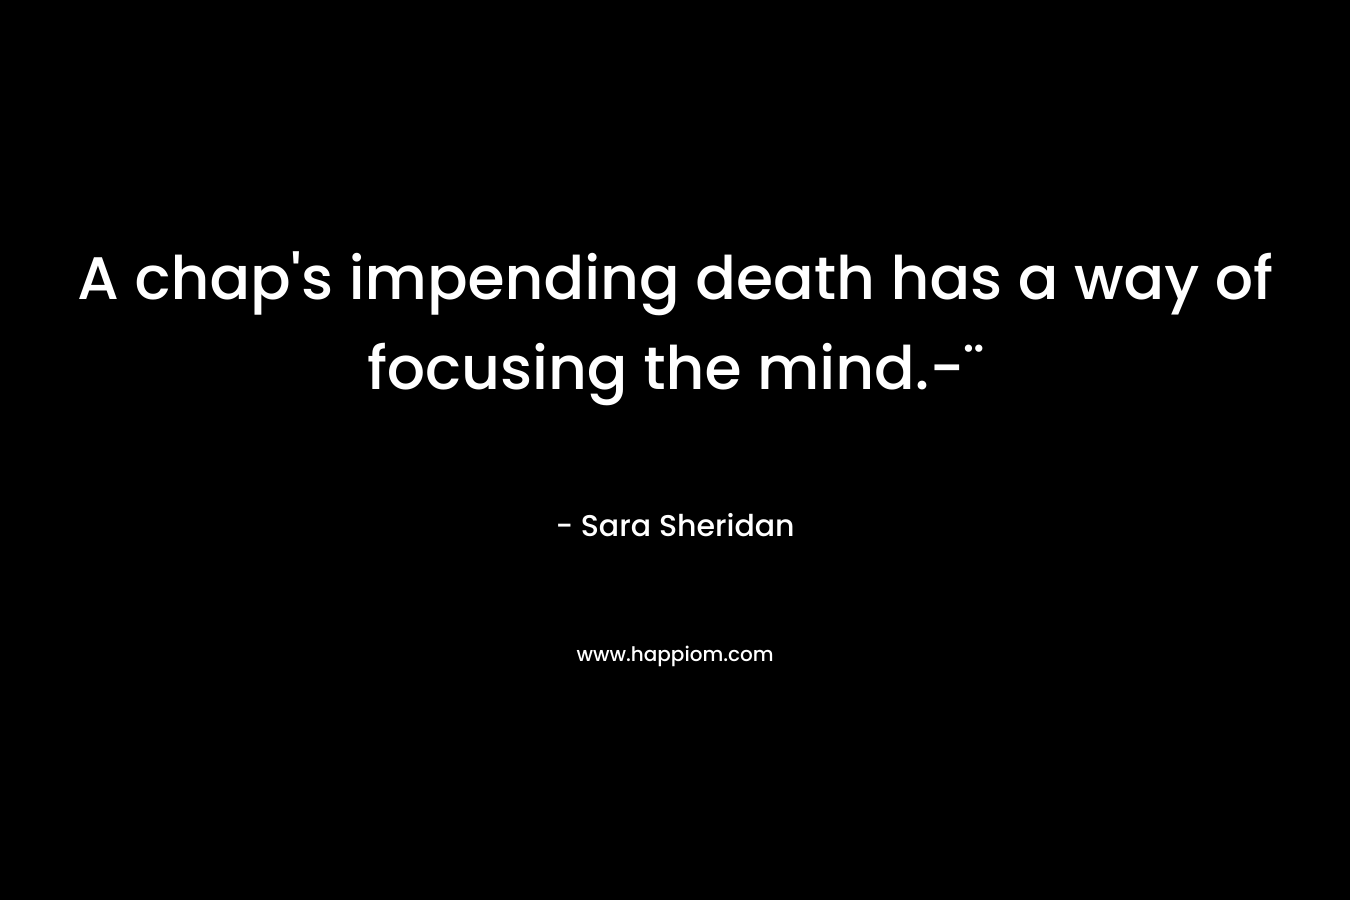 A chap's impending death has a way of focusing the mind.-¨